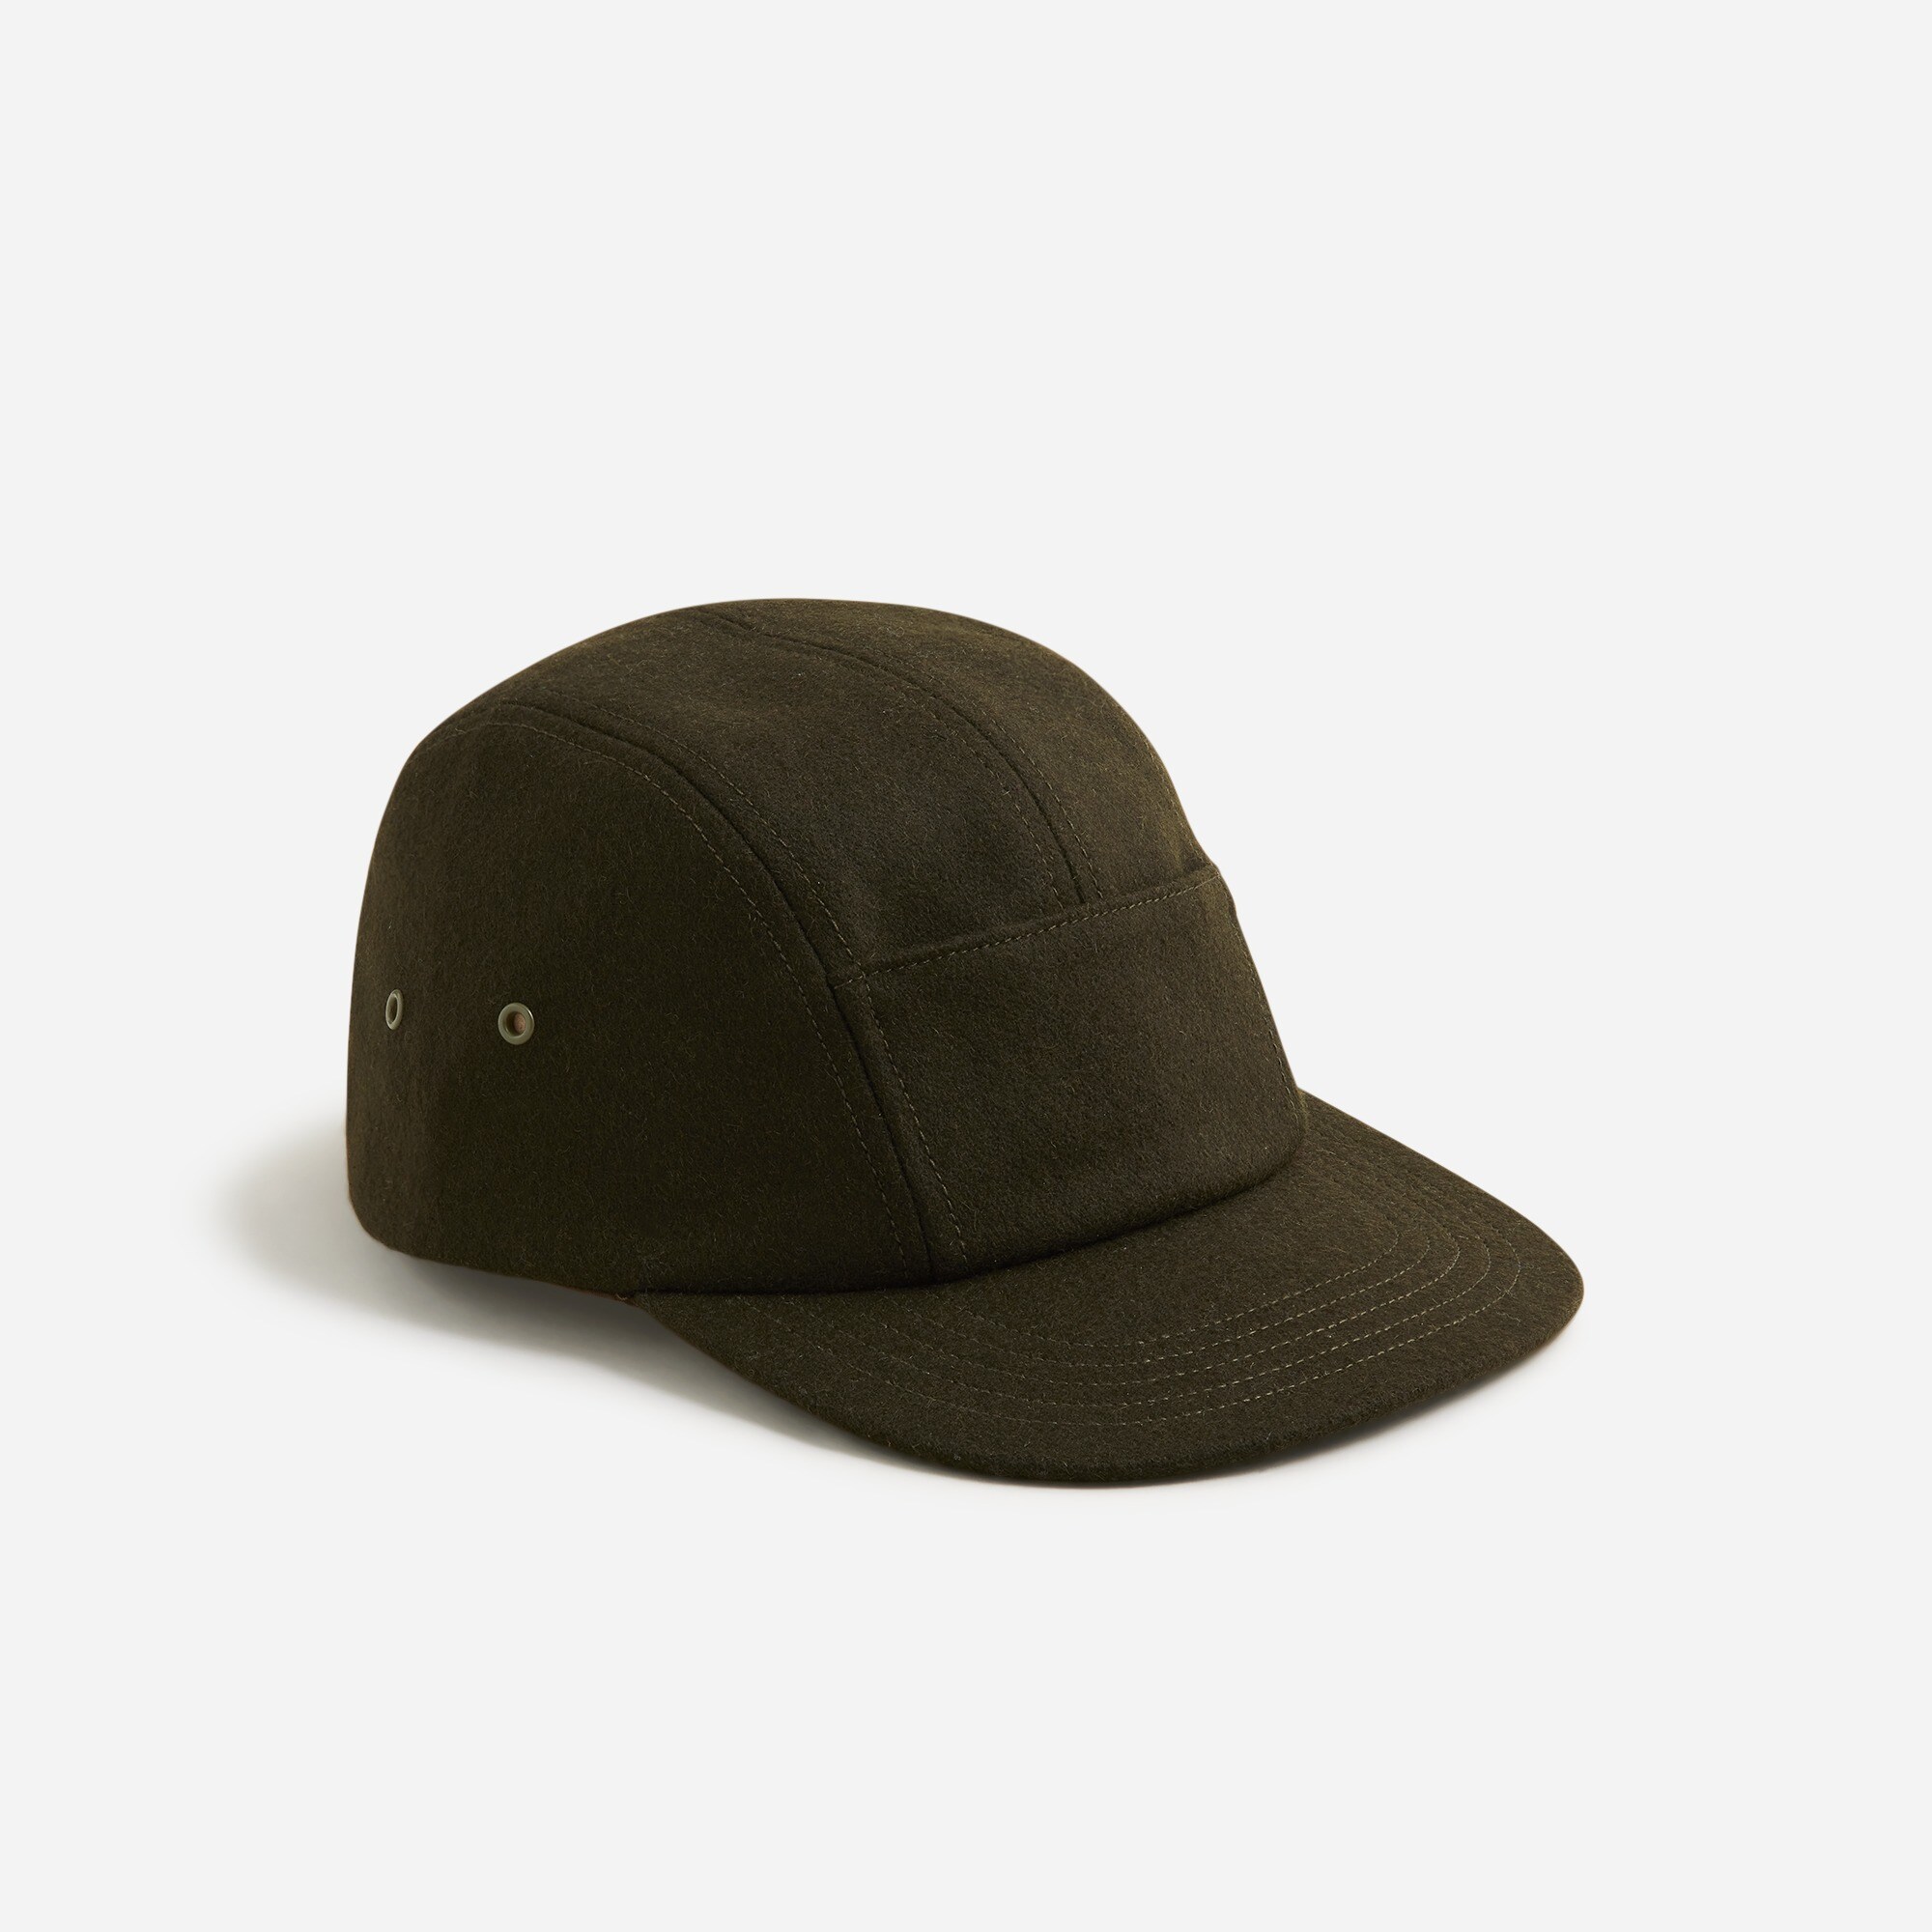  Four-panel wool-blend cap with pocket